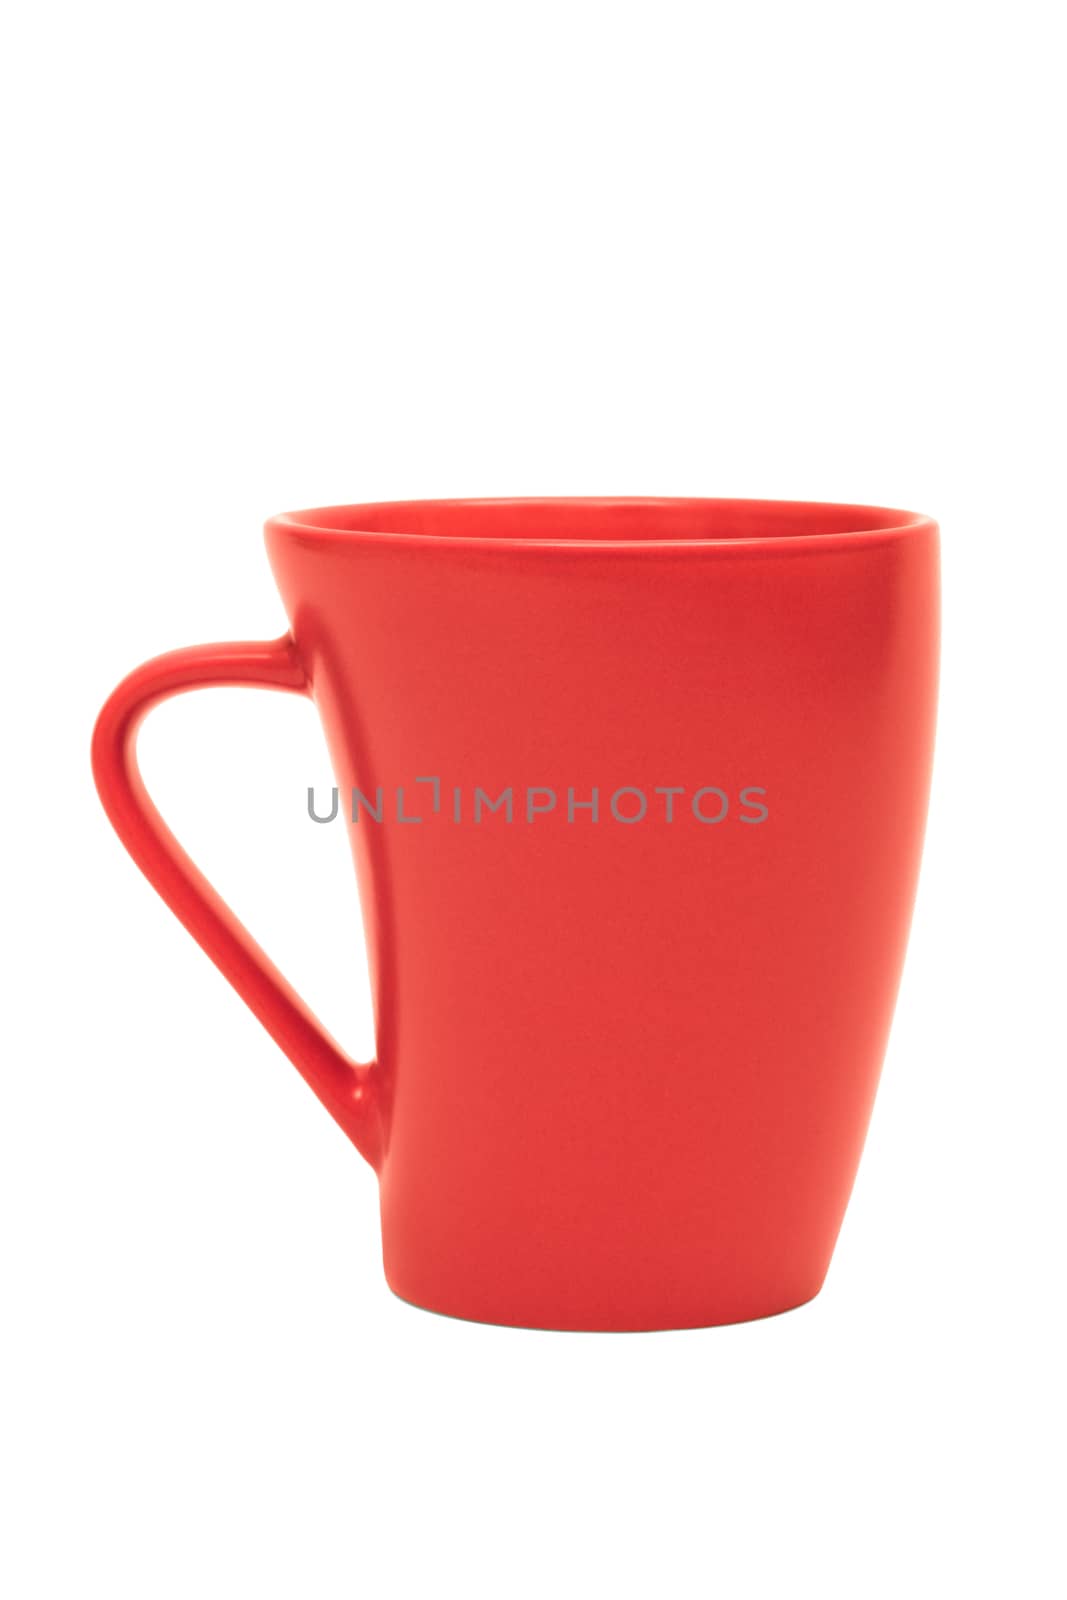 new red mug  by terex